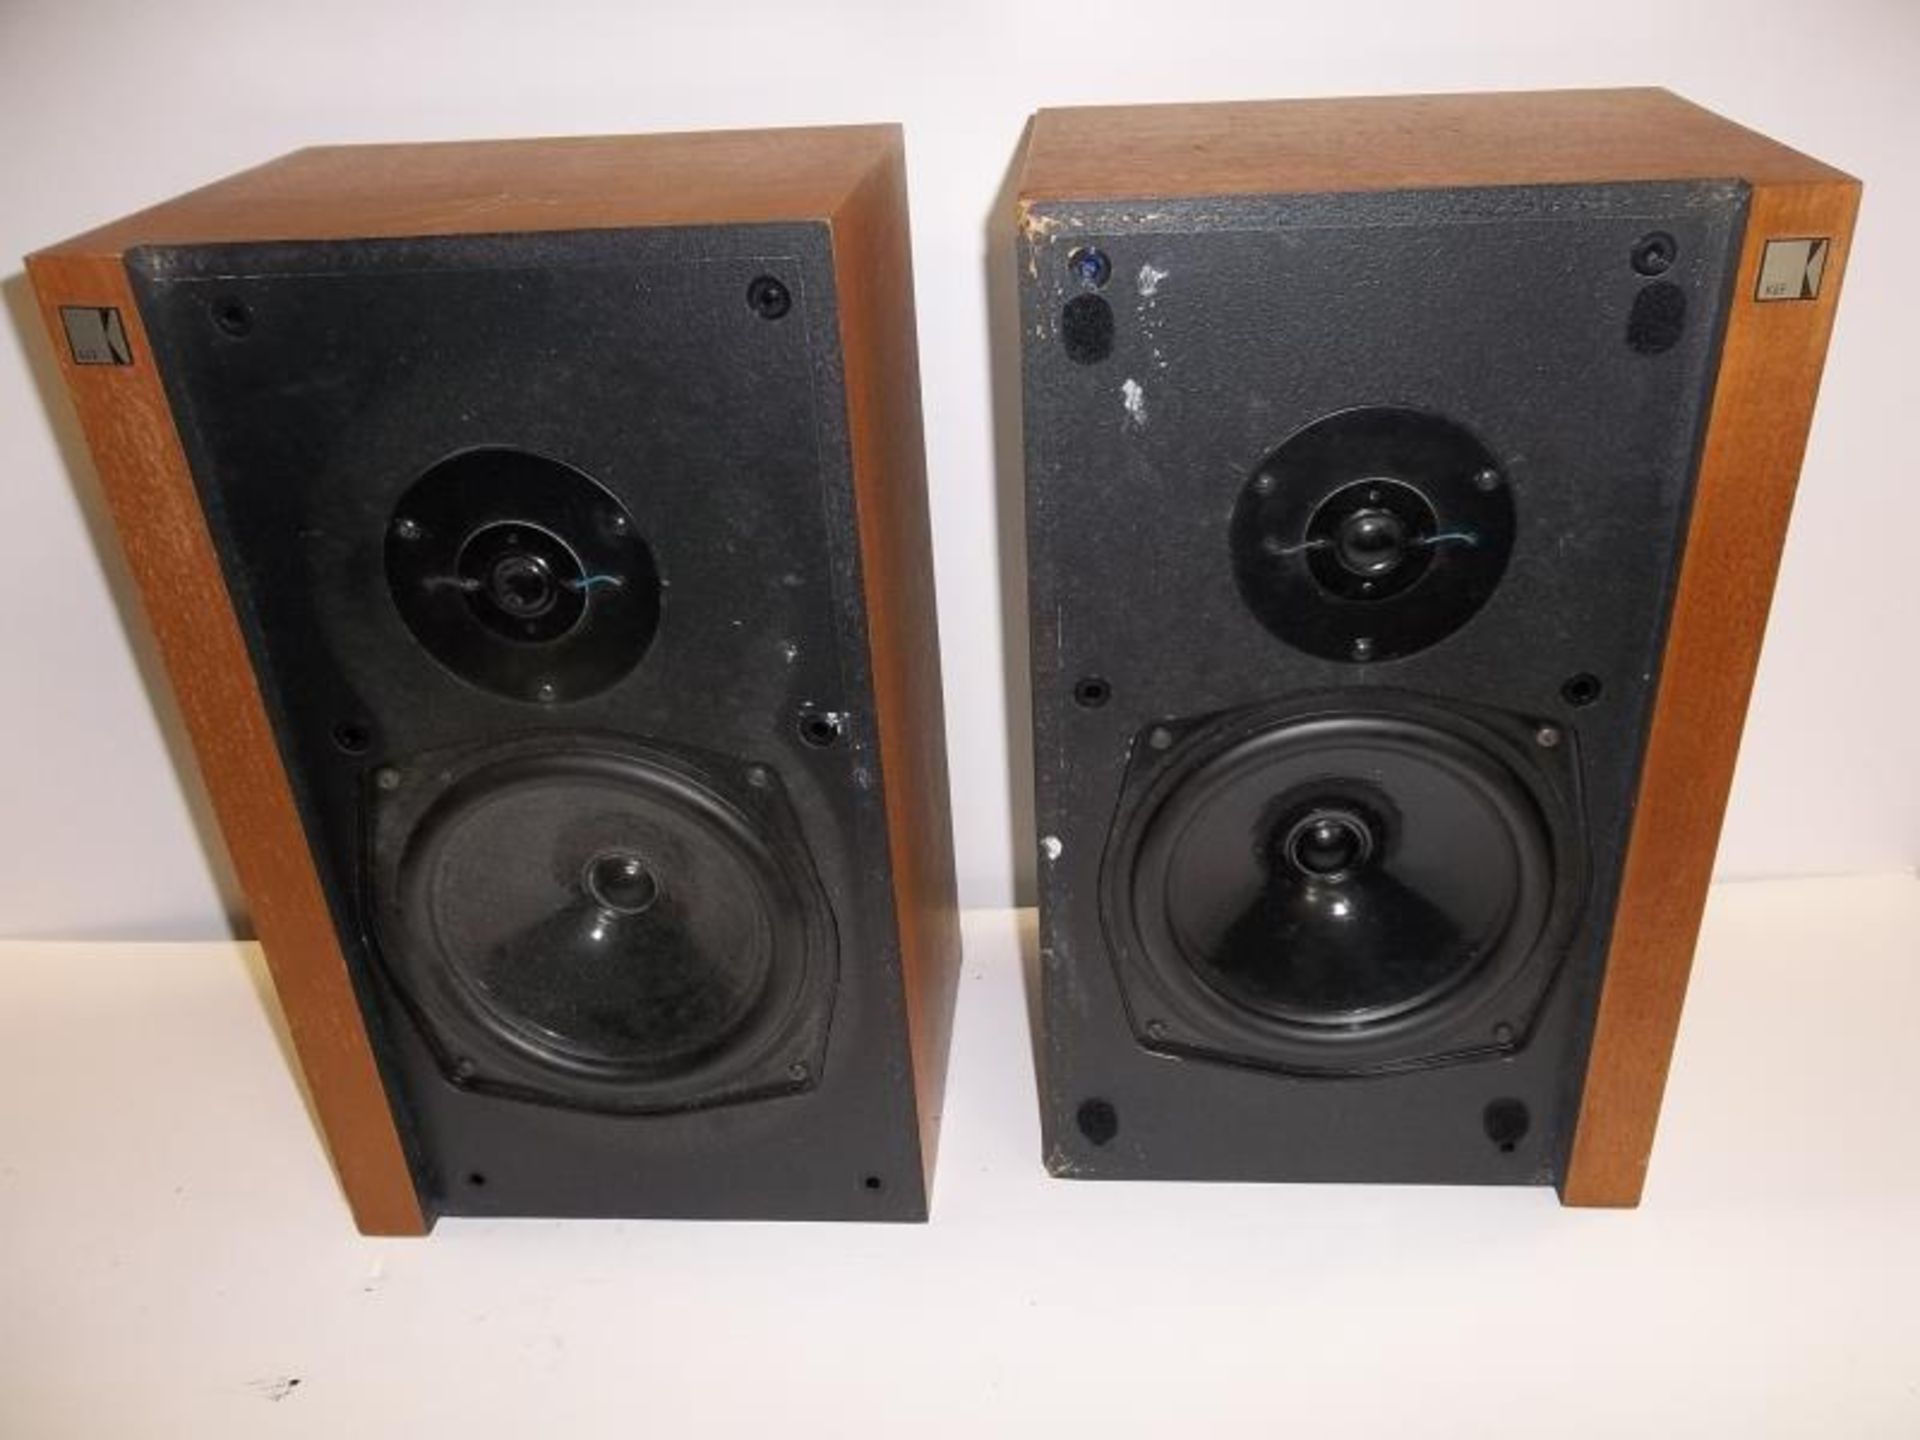 2 KEF Speakers, model 39487, 39488, small tweeter pushed in, fabric covers have hair on them, one - Image 2 of 3